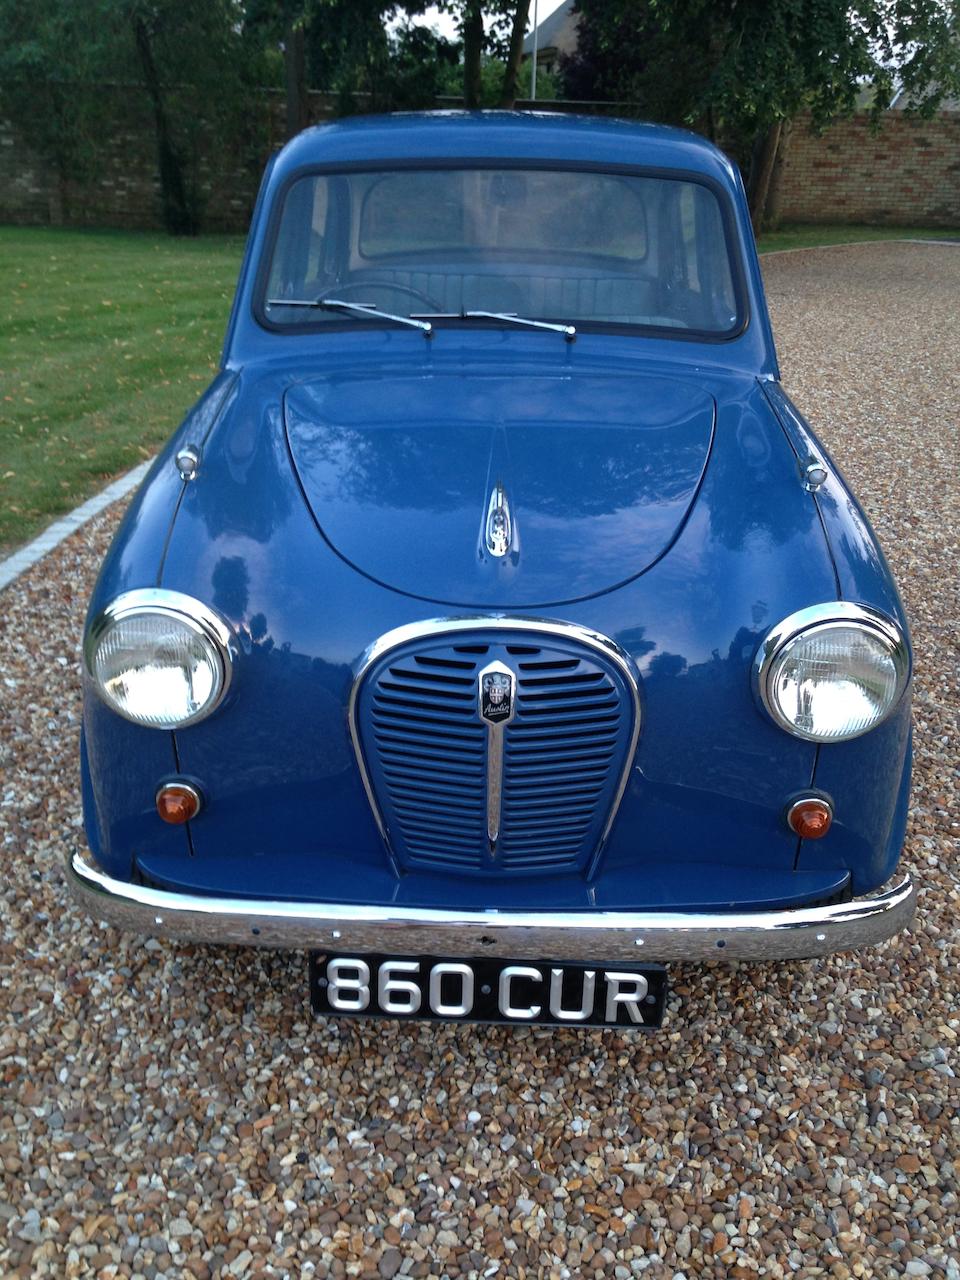 Un-restored, 3,303 miles from new,1958 Austin A35 Saloon  Chassis no. AS5-HCS-8069 Engine no. 9-U-H-806594